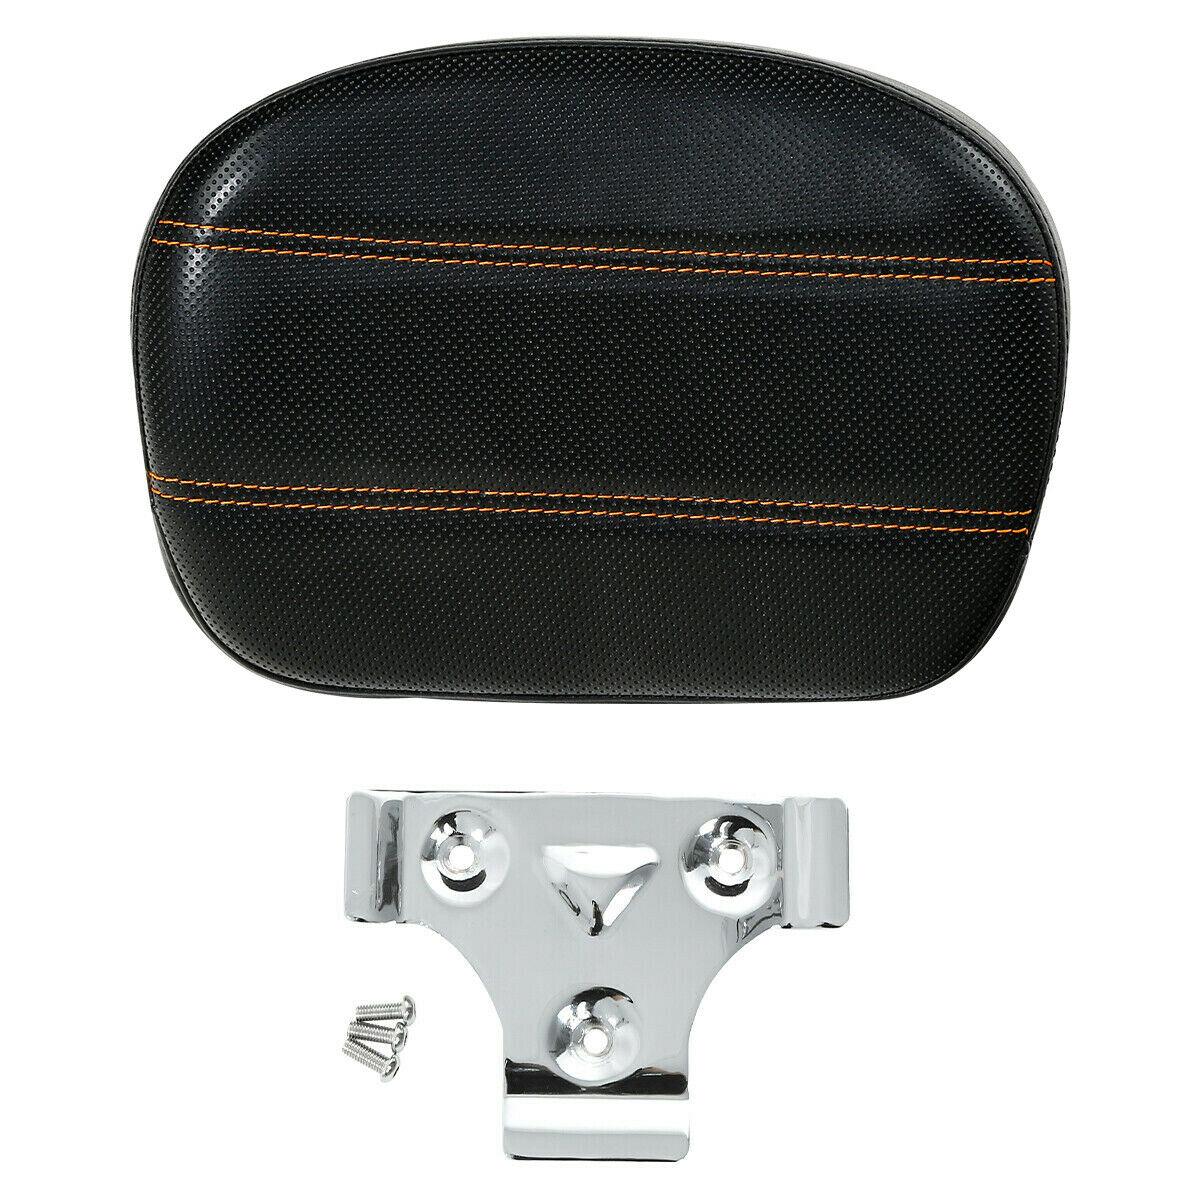 Black Rear Passenger Sissy Bar Pad Fit For Harley Street  Road Glide Tri Glide - Moto Life Products